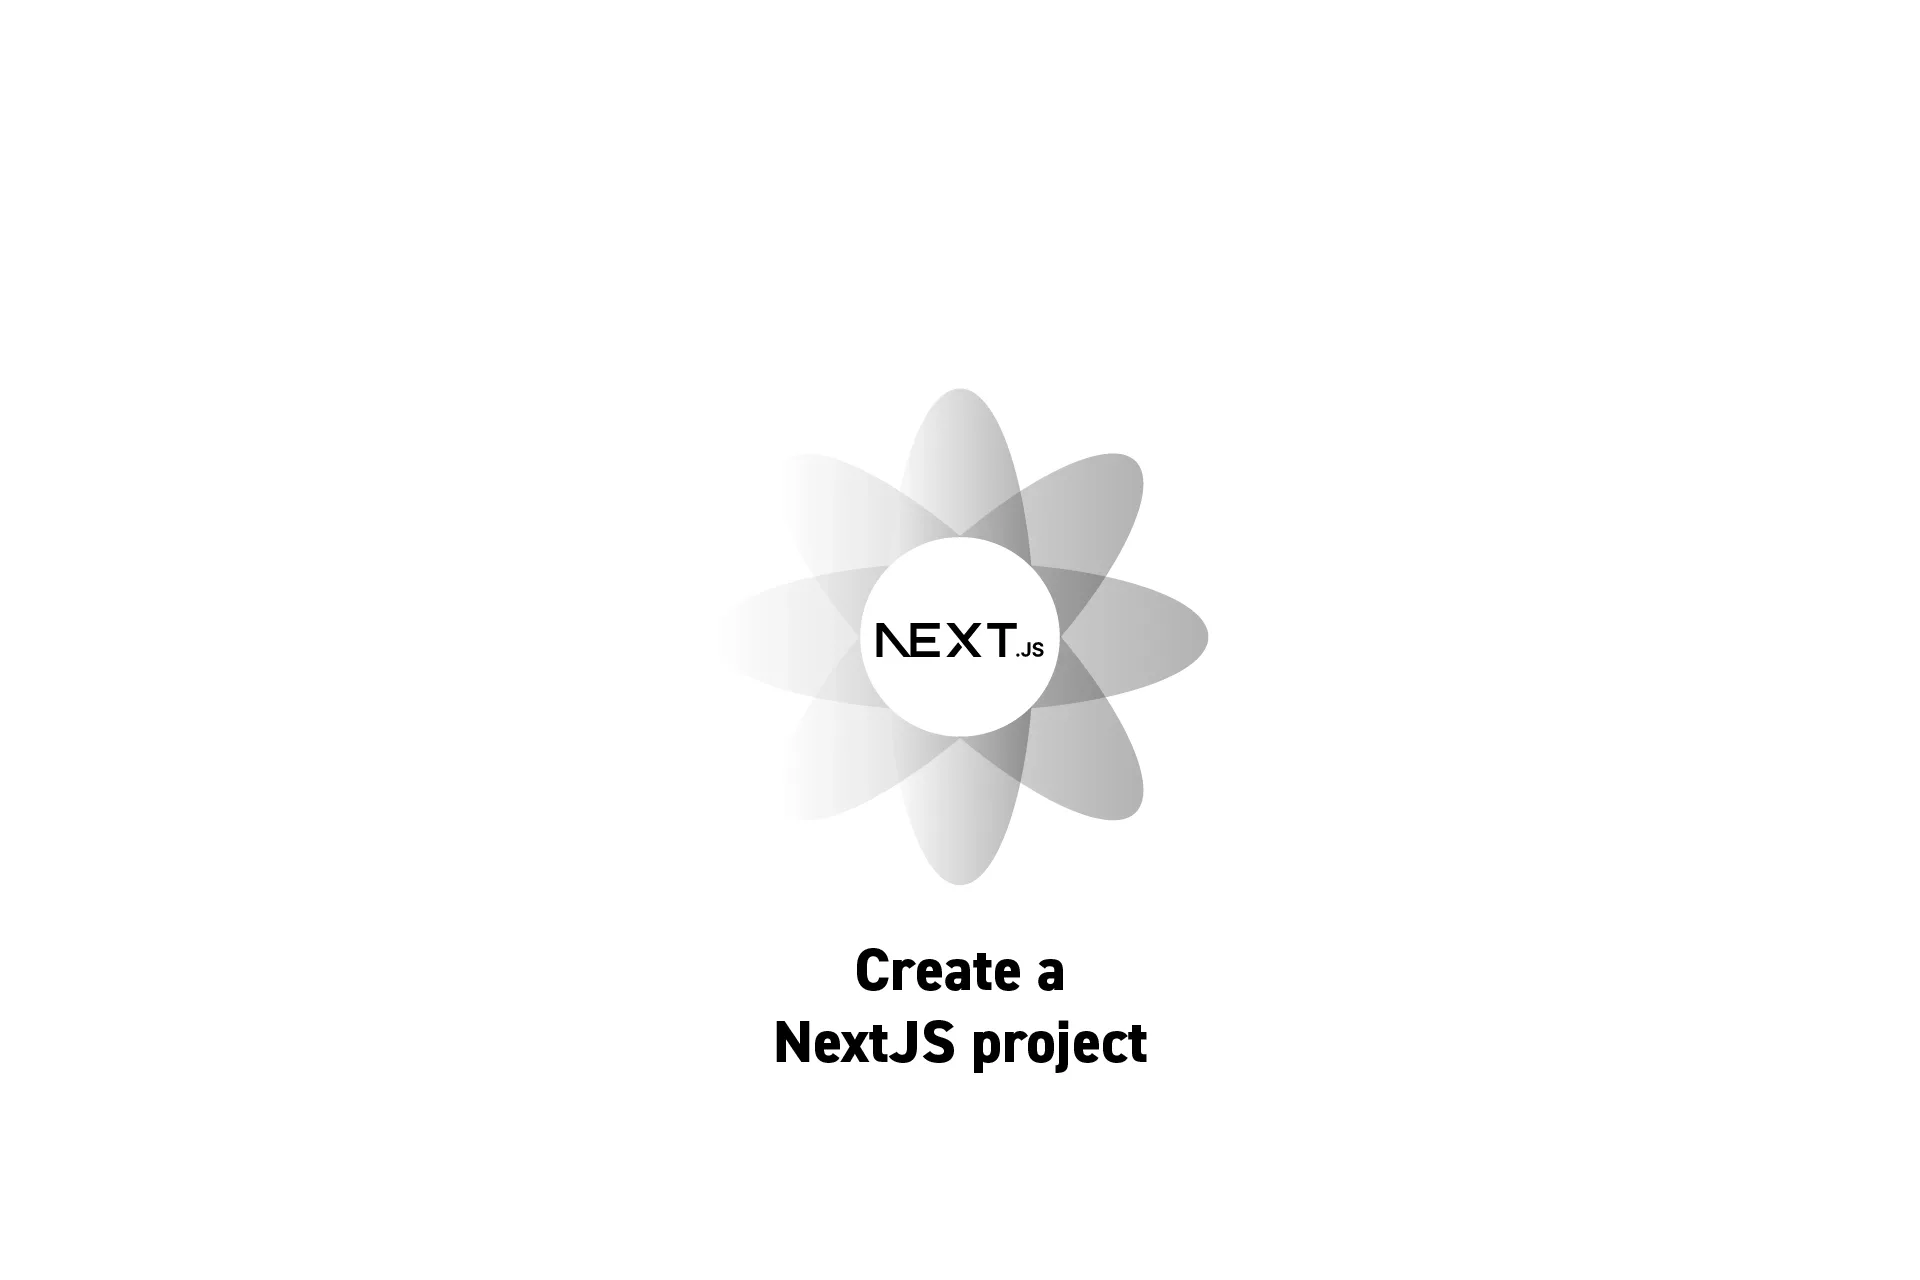 A flower that represents NextJS with the text "Create a NextJS project" beneath it.